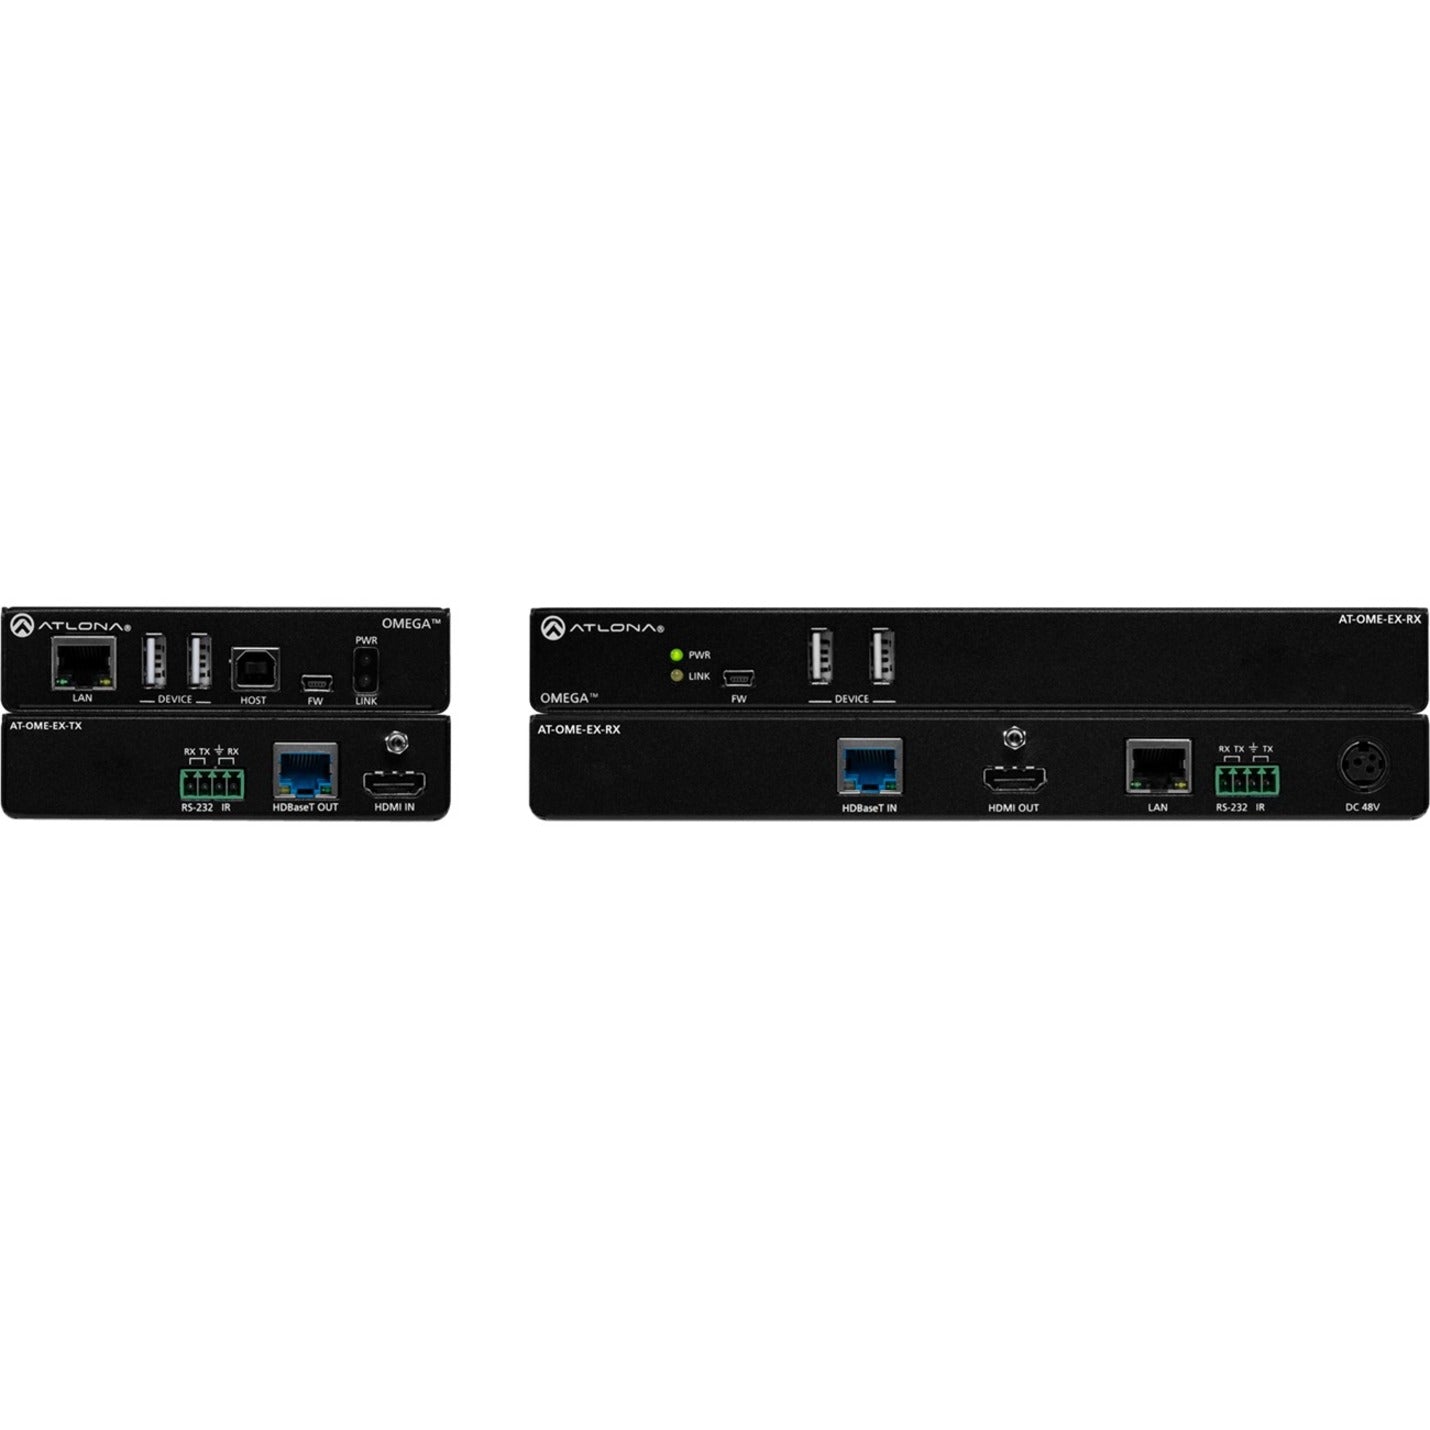 Atlona AT-OME-EX-KIT HDBaseT TX/RX for HDMI with USB, 4K Video Extender Transmitter/Receiver